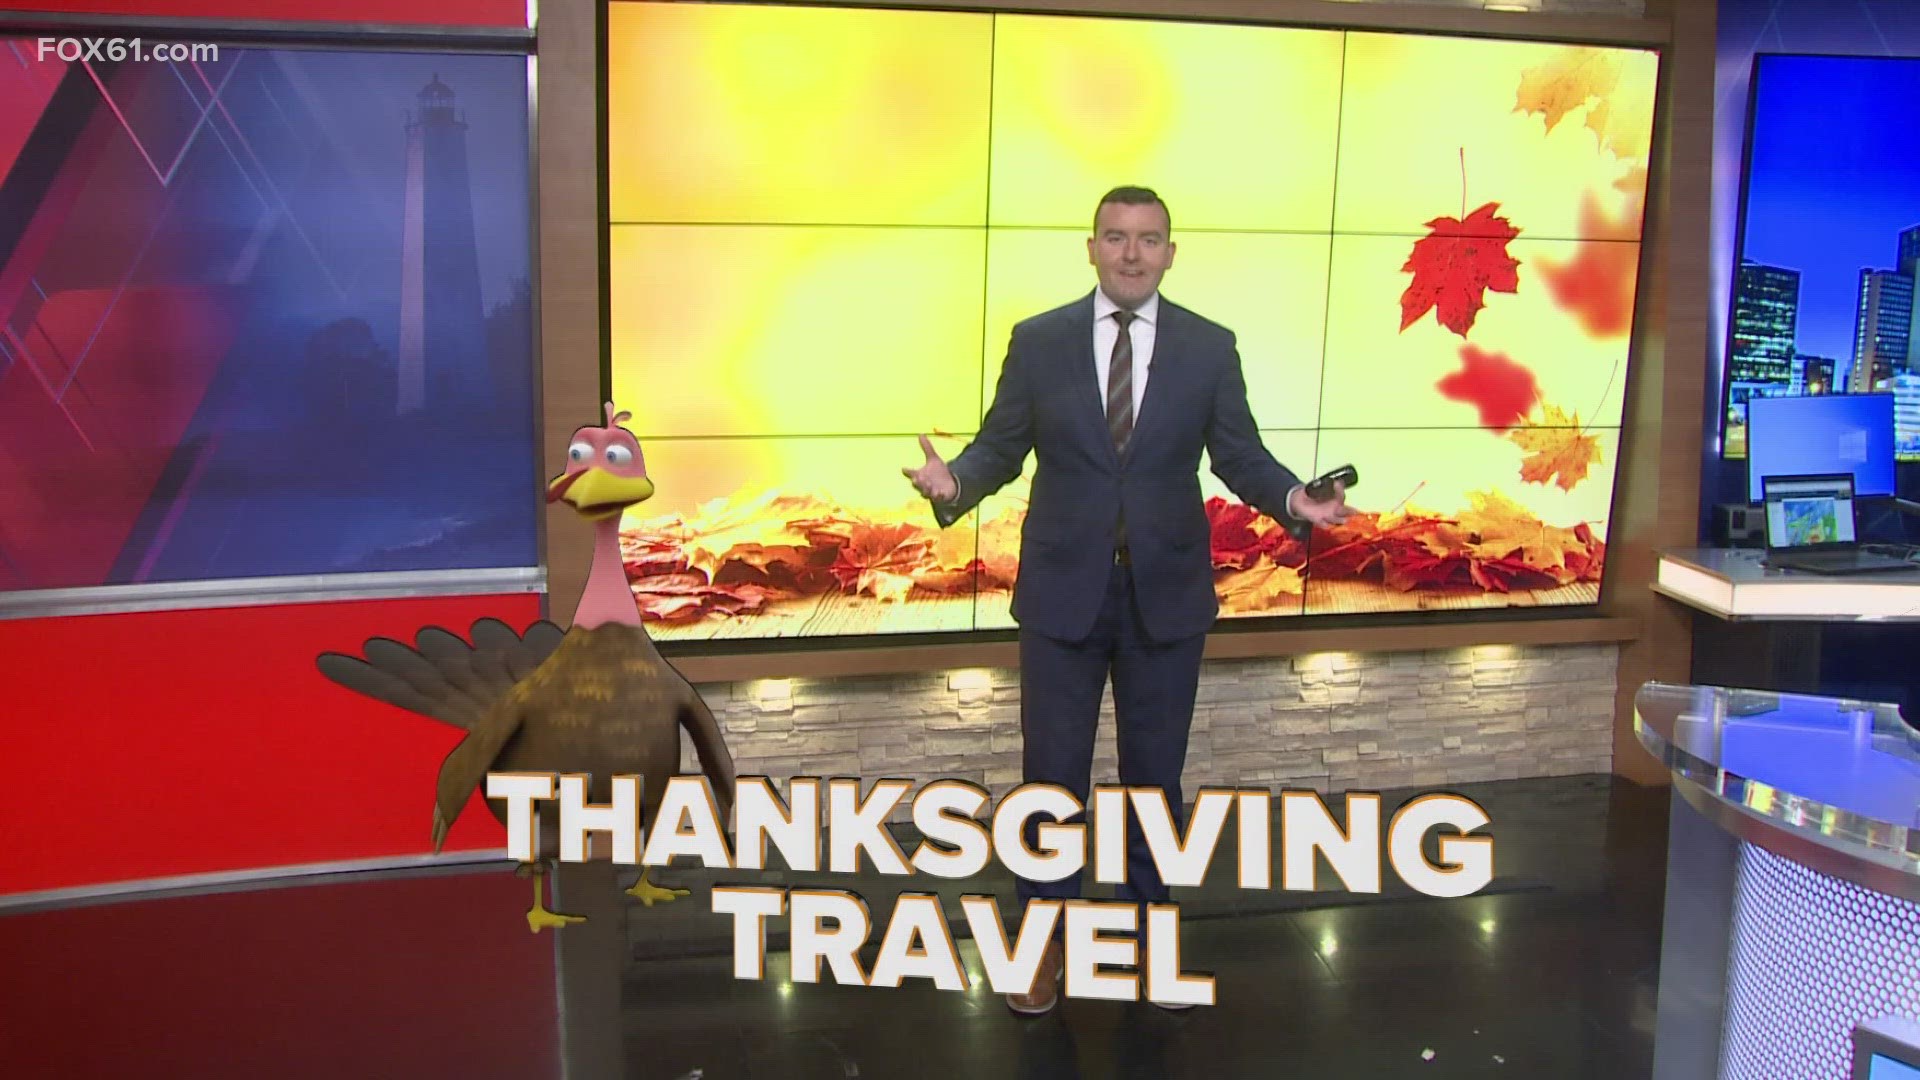 The Thanksgiving week is here, and 'weather' or not, travel can be disruptive on the roads or in the air.